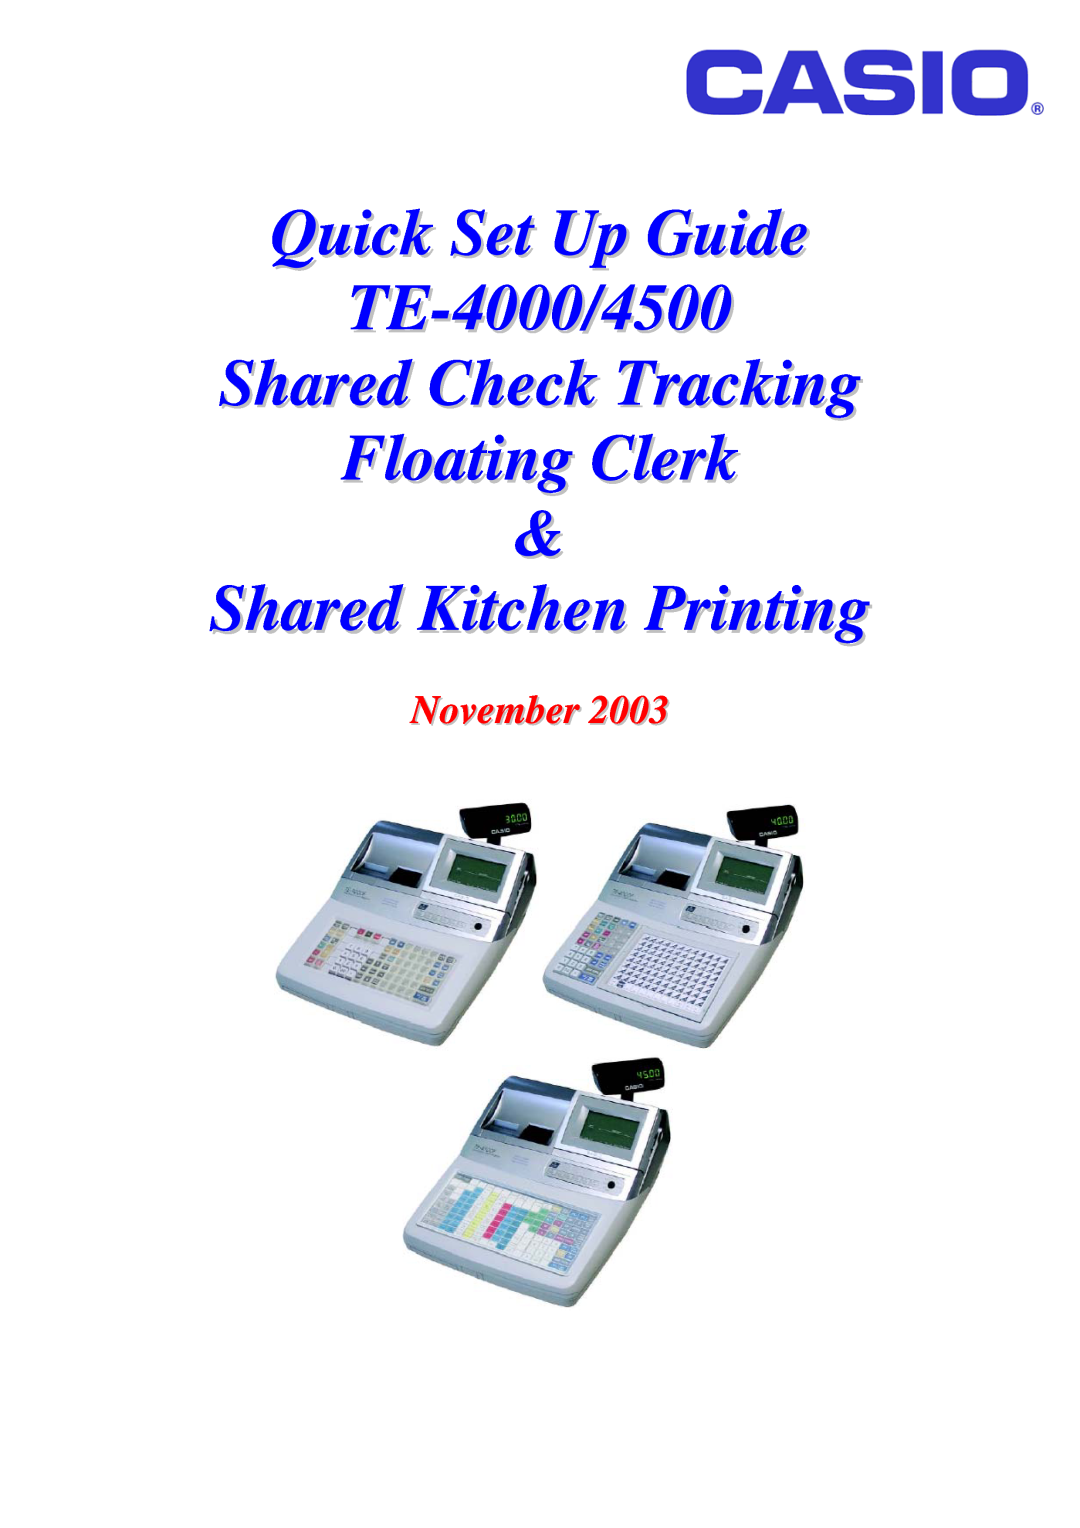 Delta manual Quick Set Up Guide TE-4000/4500 Shared Check Tracking Floating Clerk, Shared Kitchen Printing, November 